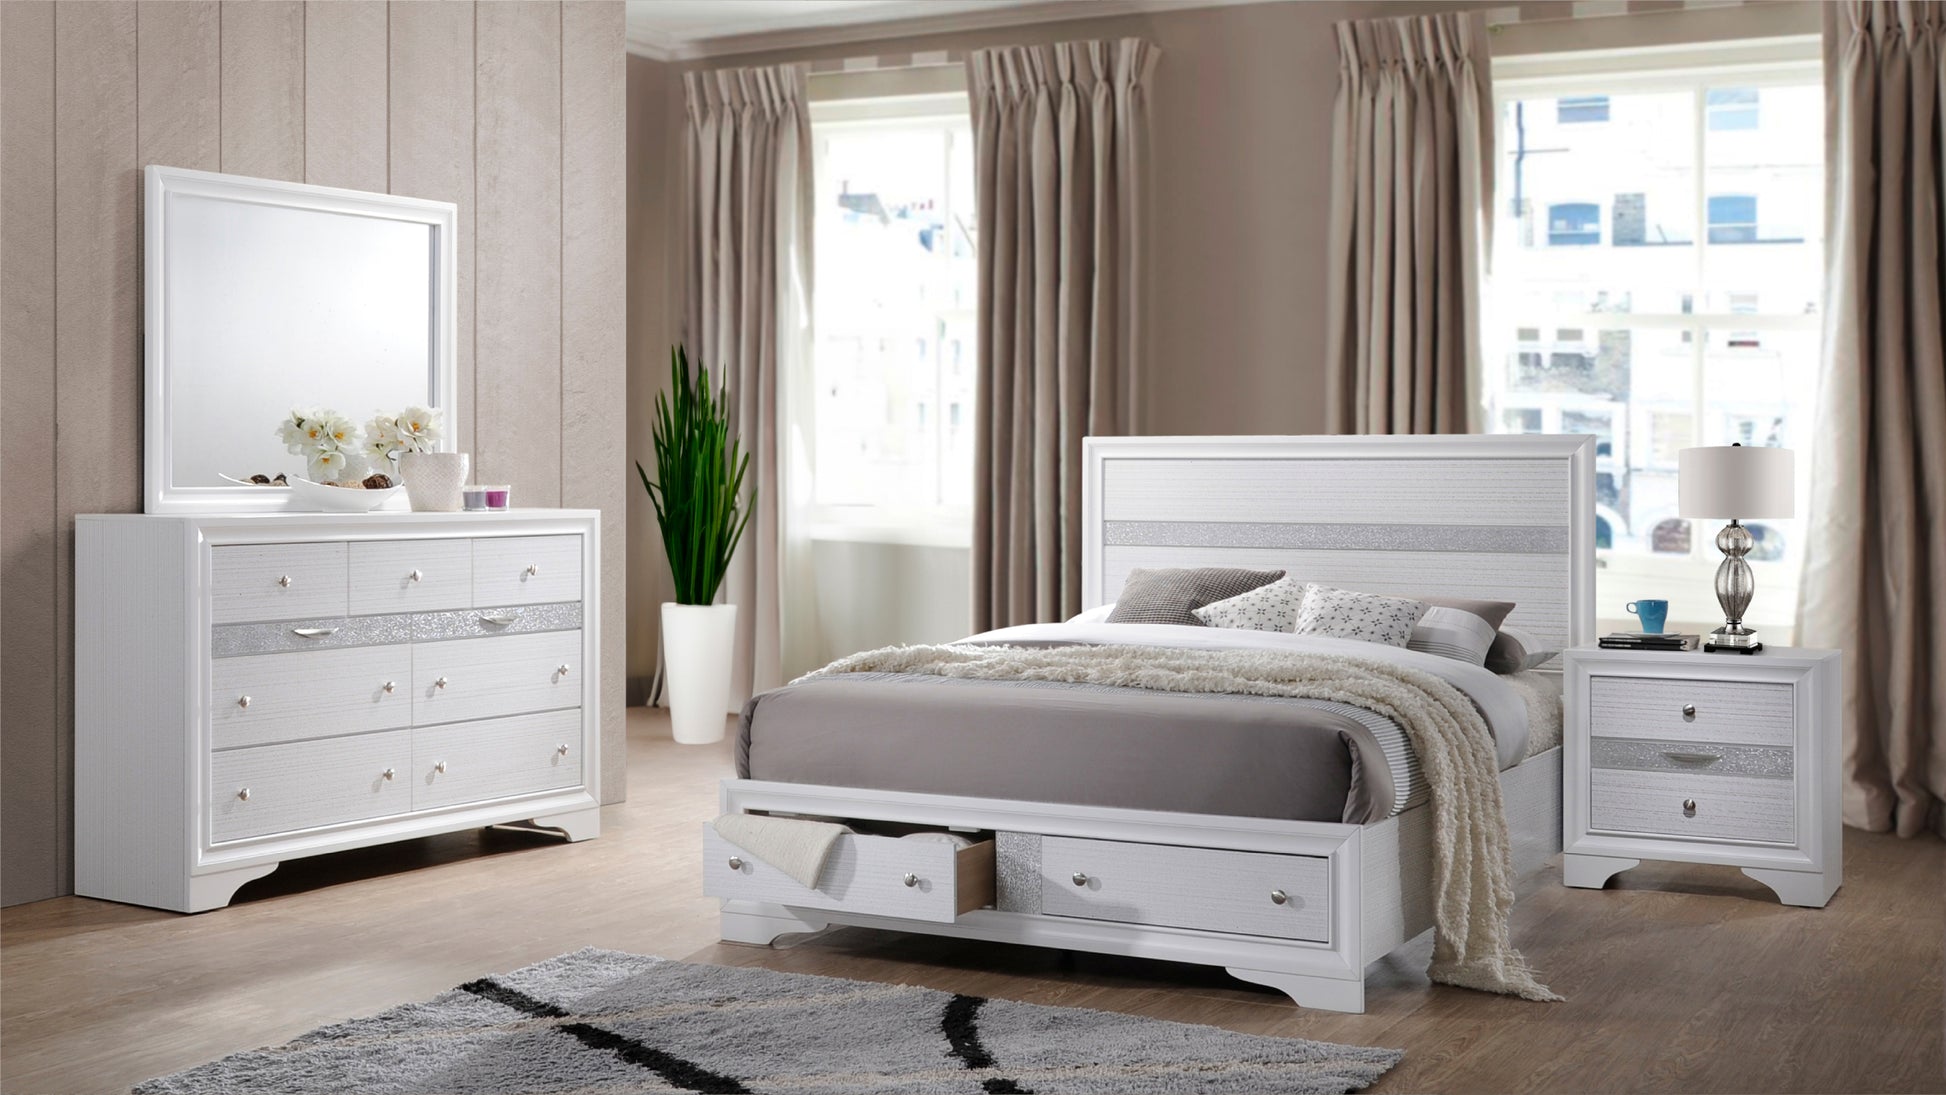 Matrix Traditional Style Queen 4 Pc Storage Bedroom box spring not required-queen-white-wood-4 piece